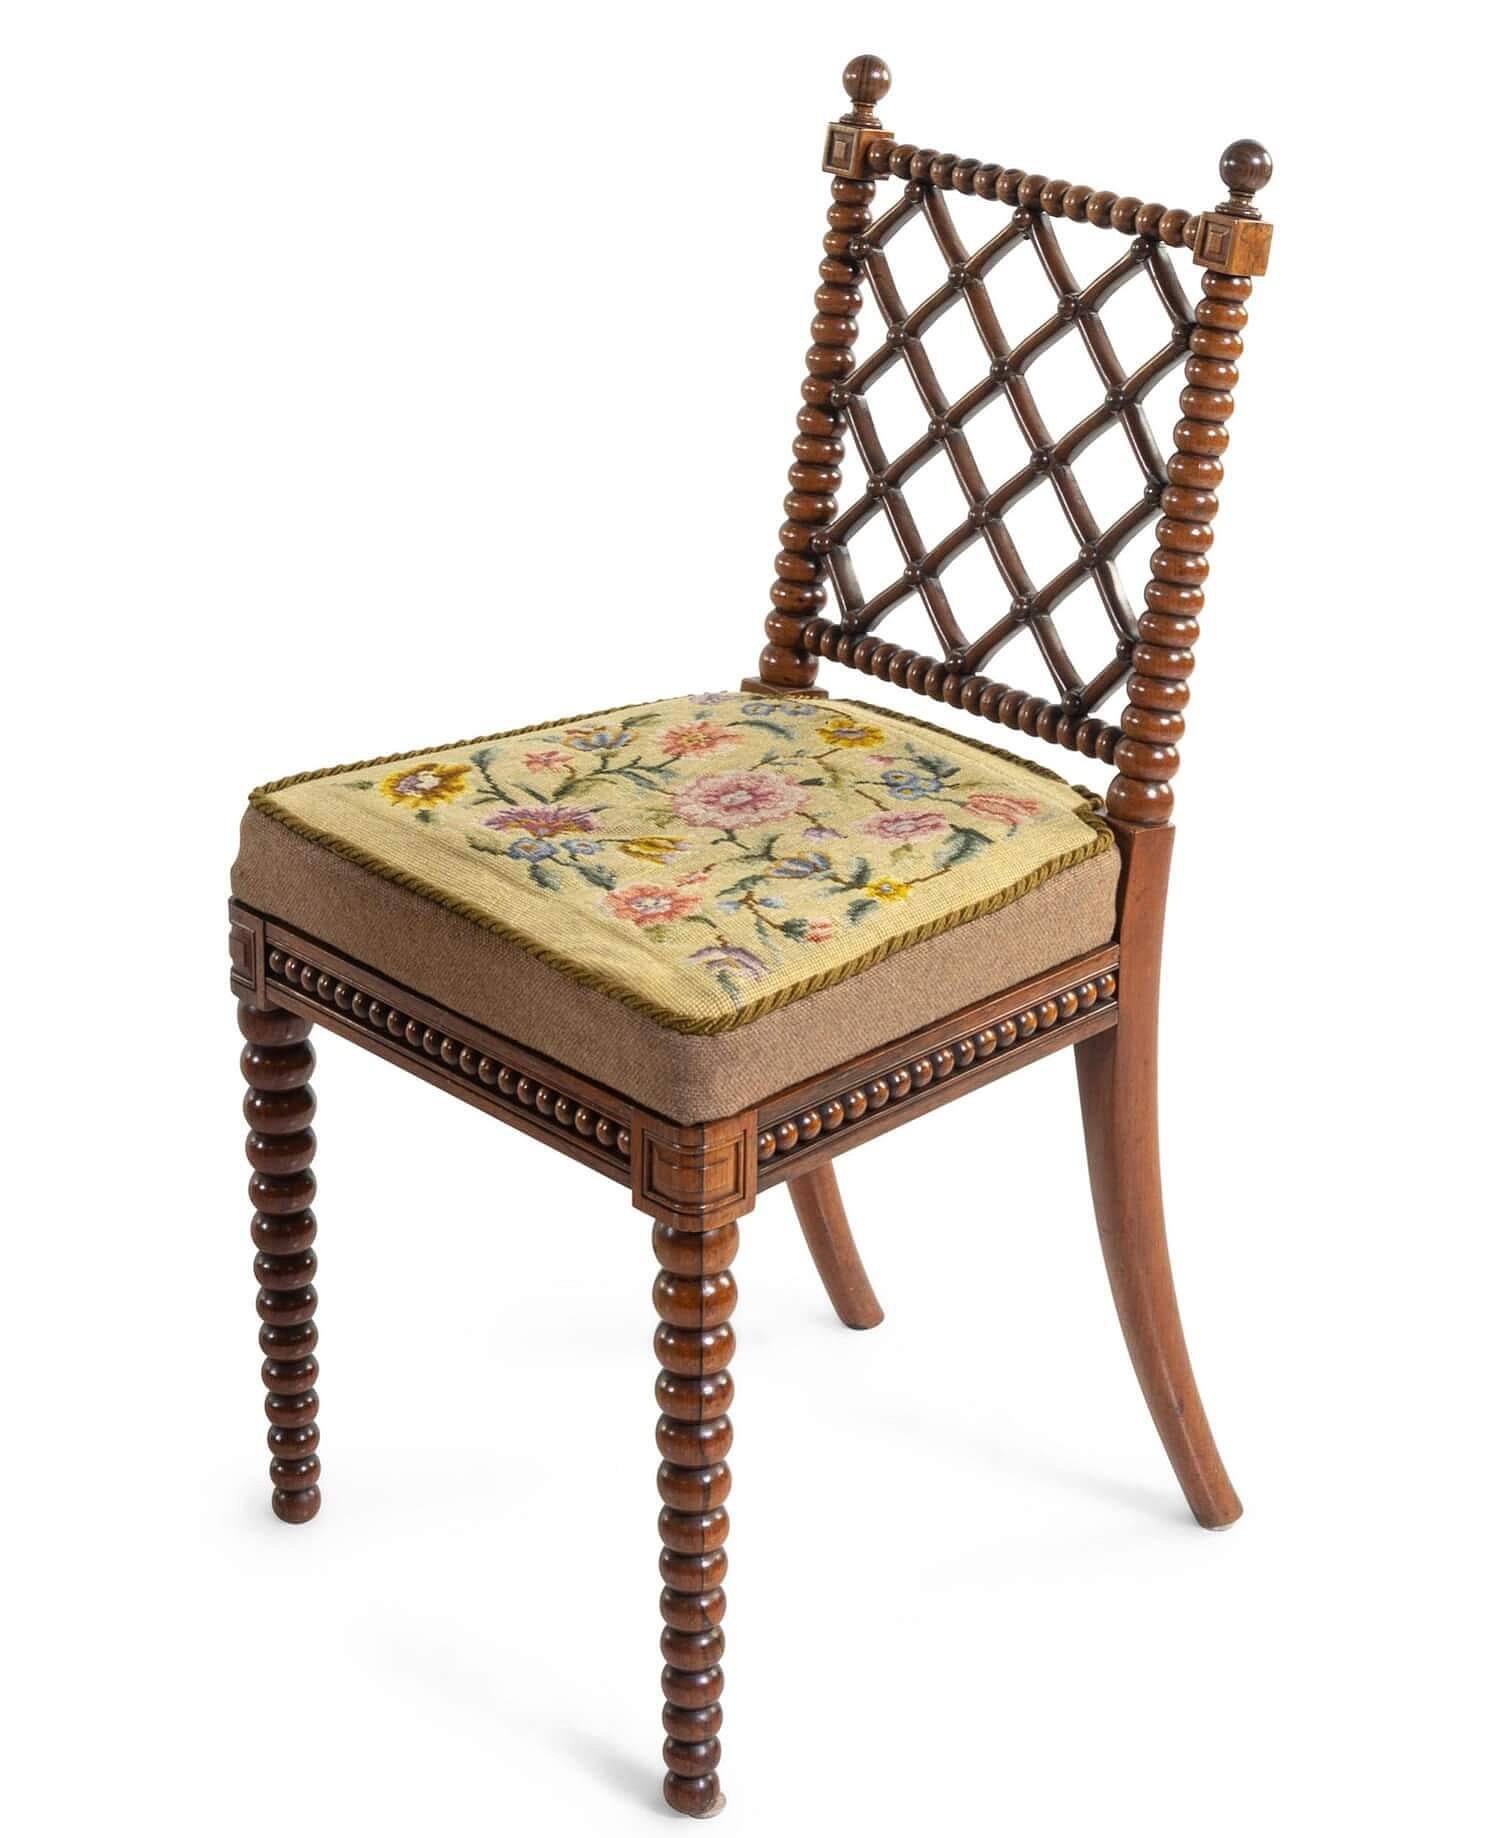 Upholstery English Regency Oak Bobbin Chairs Attributed to Gillows, Set of Four, circa 1825